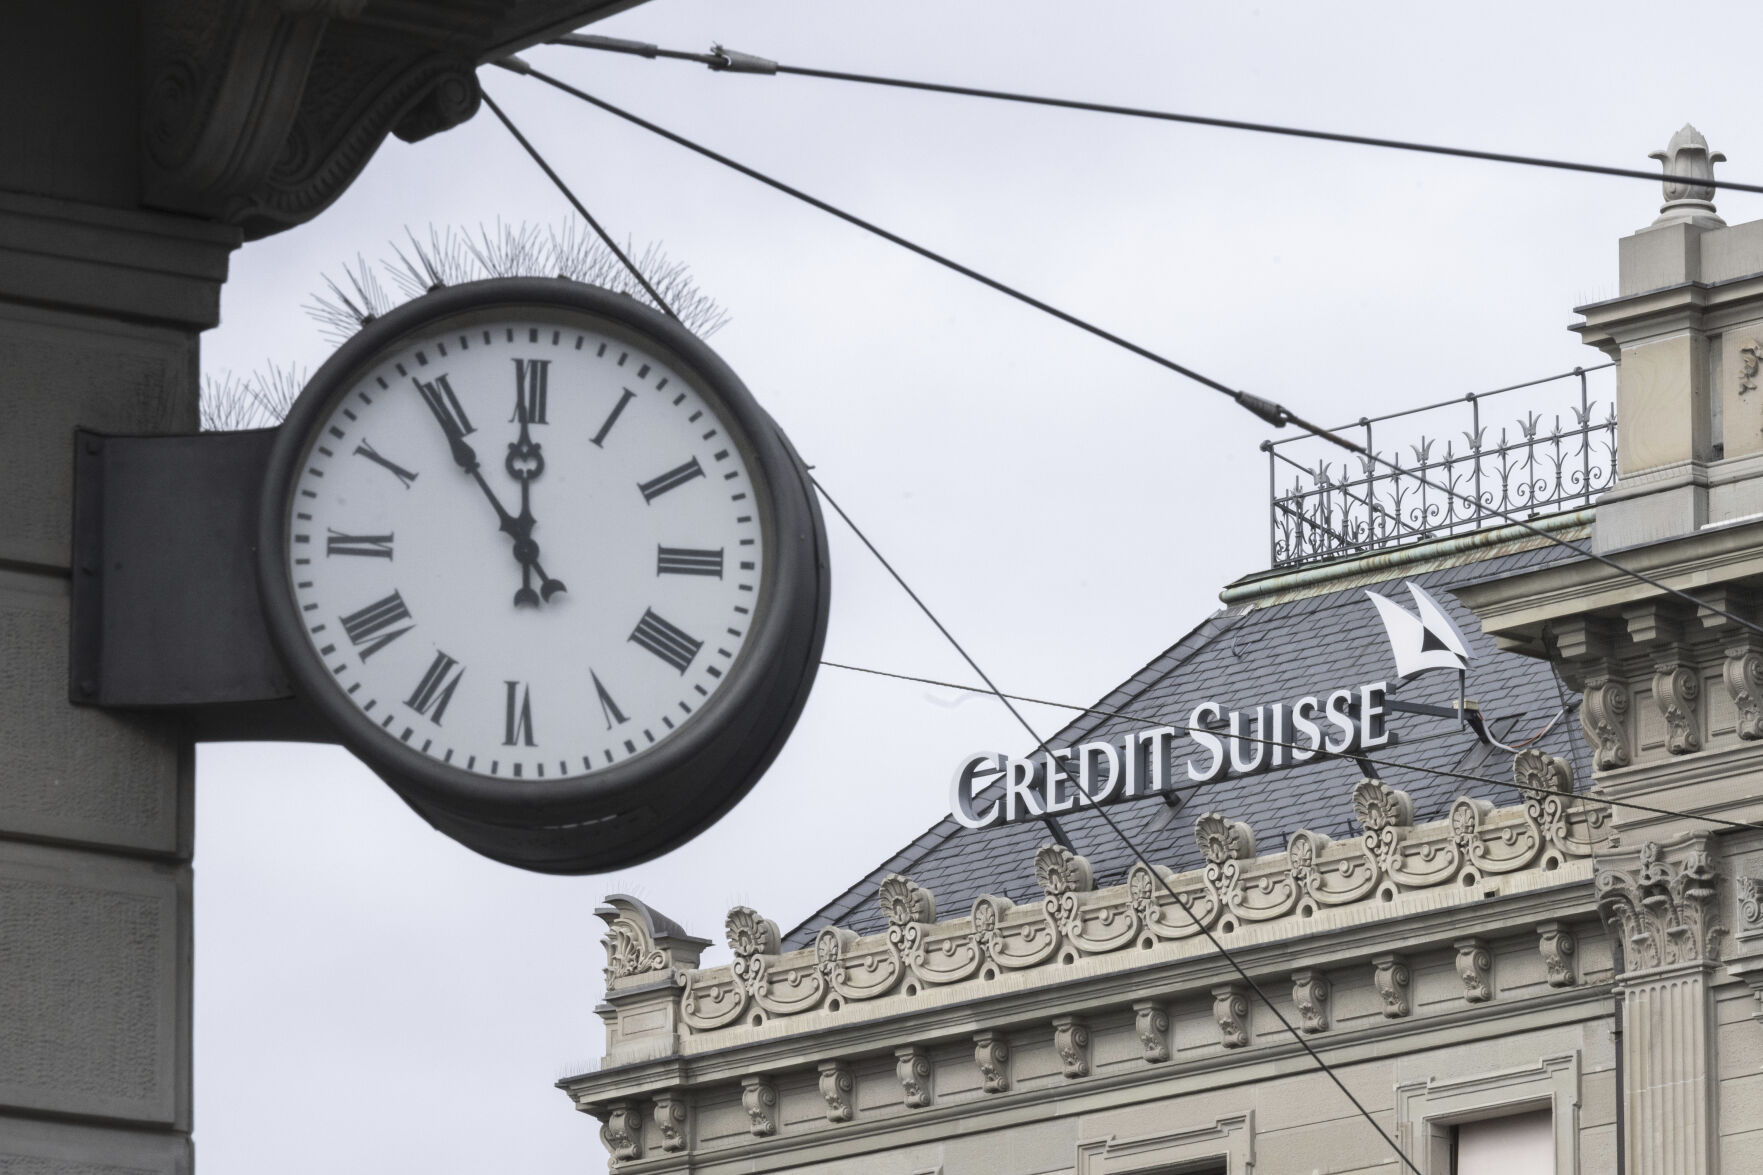 <p>FILE - A clock next to a logo of the Swiss bank Credit Suisse, in Zurich, Switzerland, on March 20, 2023. Analysts say the UBS takeover of embattled rival Credit Suisse has shaken Switzerland’s self-image and dented its reputation as a global financial center. They warn that the country’s prosperity could grow too dependent on a single banking behemoth. (Ennio Leanza/Keystone via AP, File)</p>   PHOTO CREDIT: Ennio Leanza